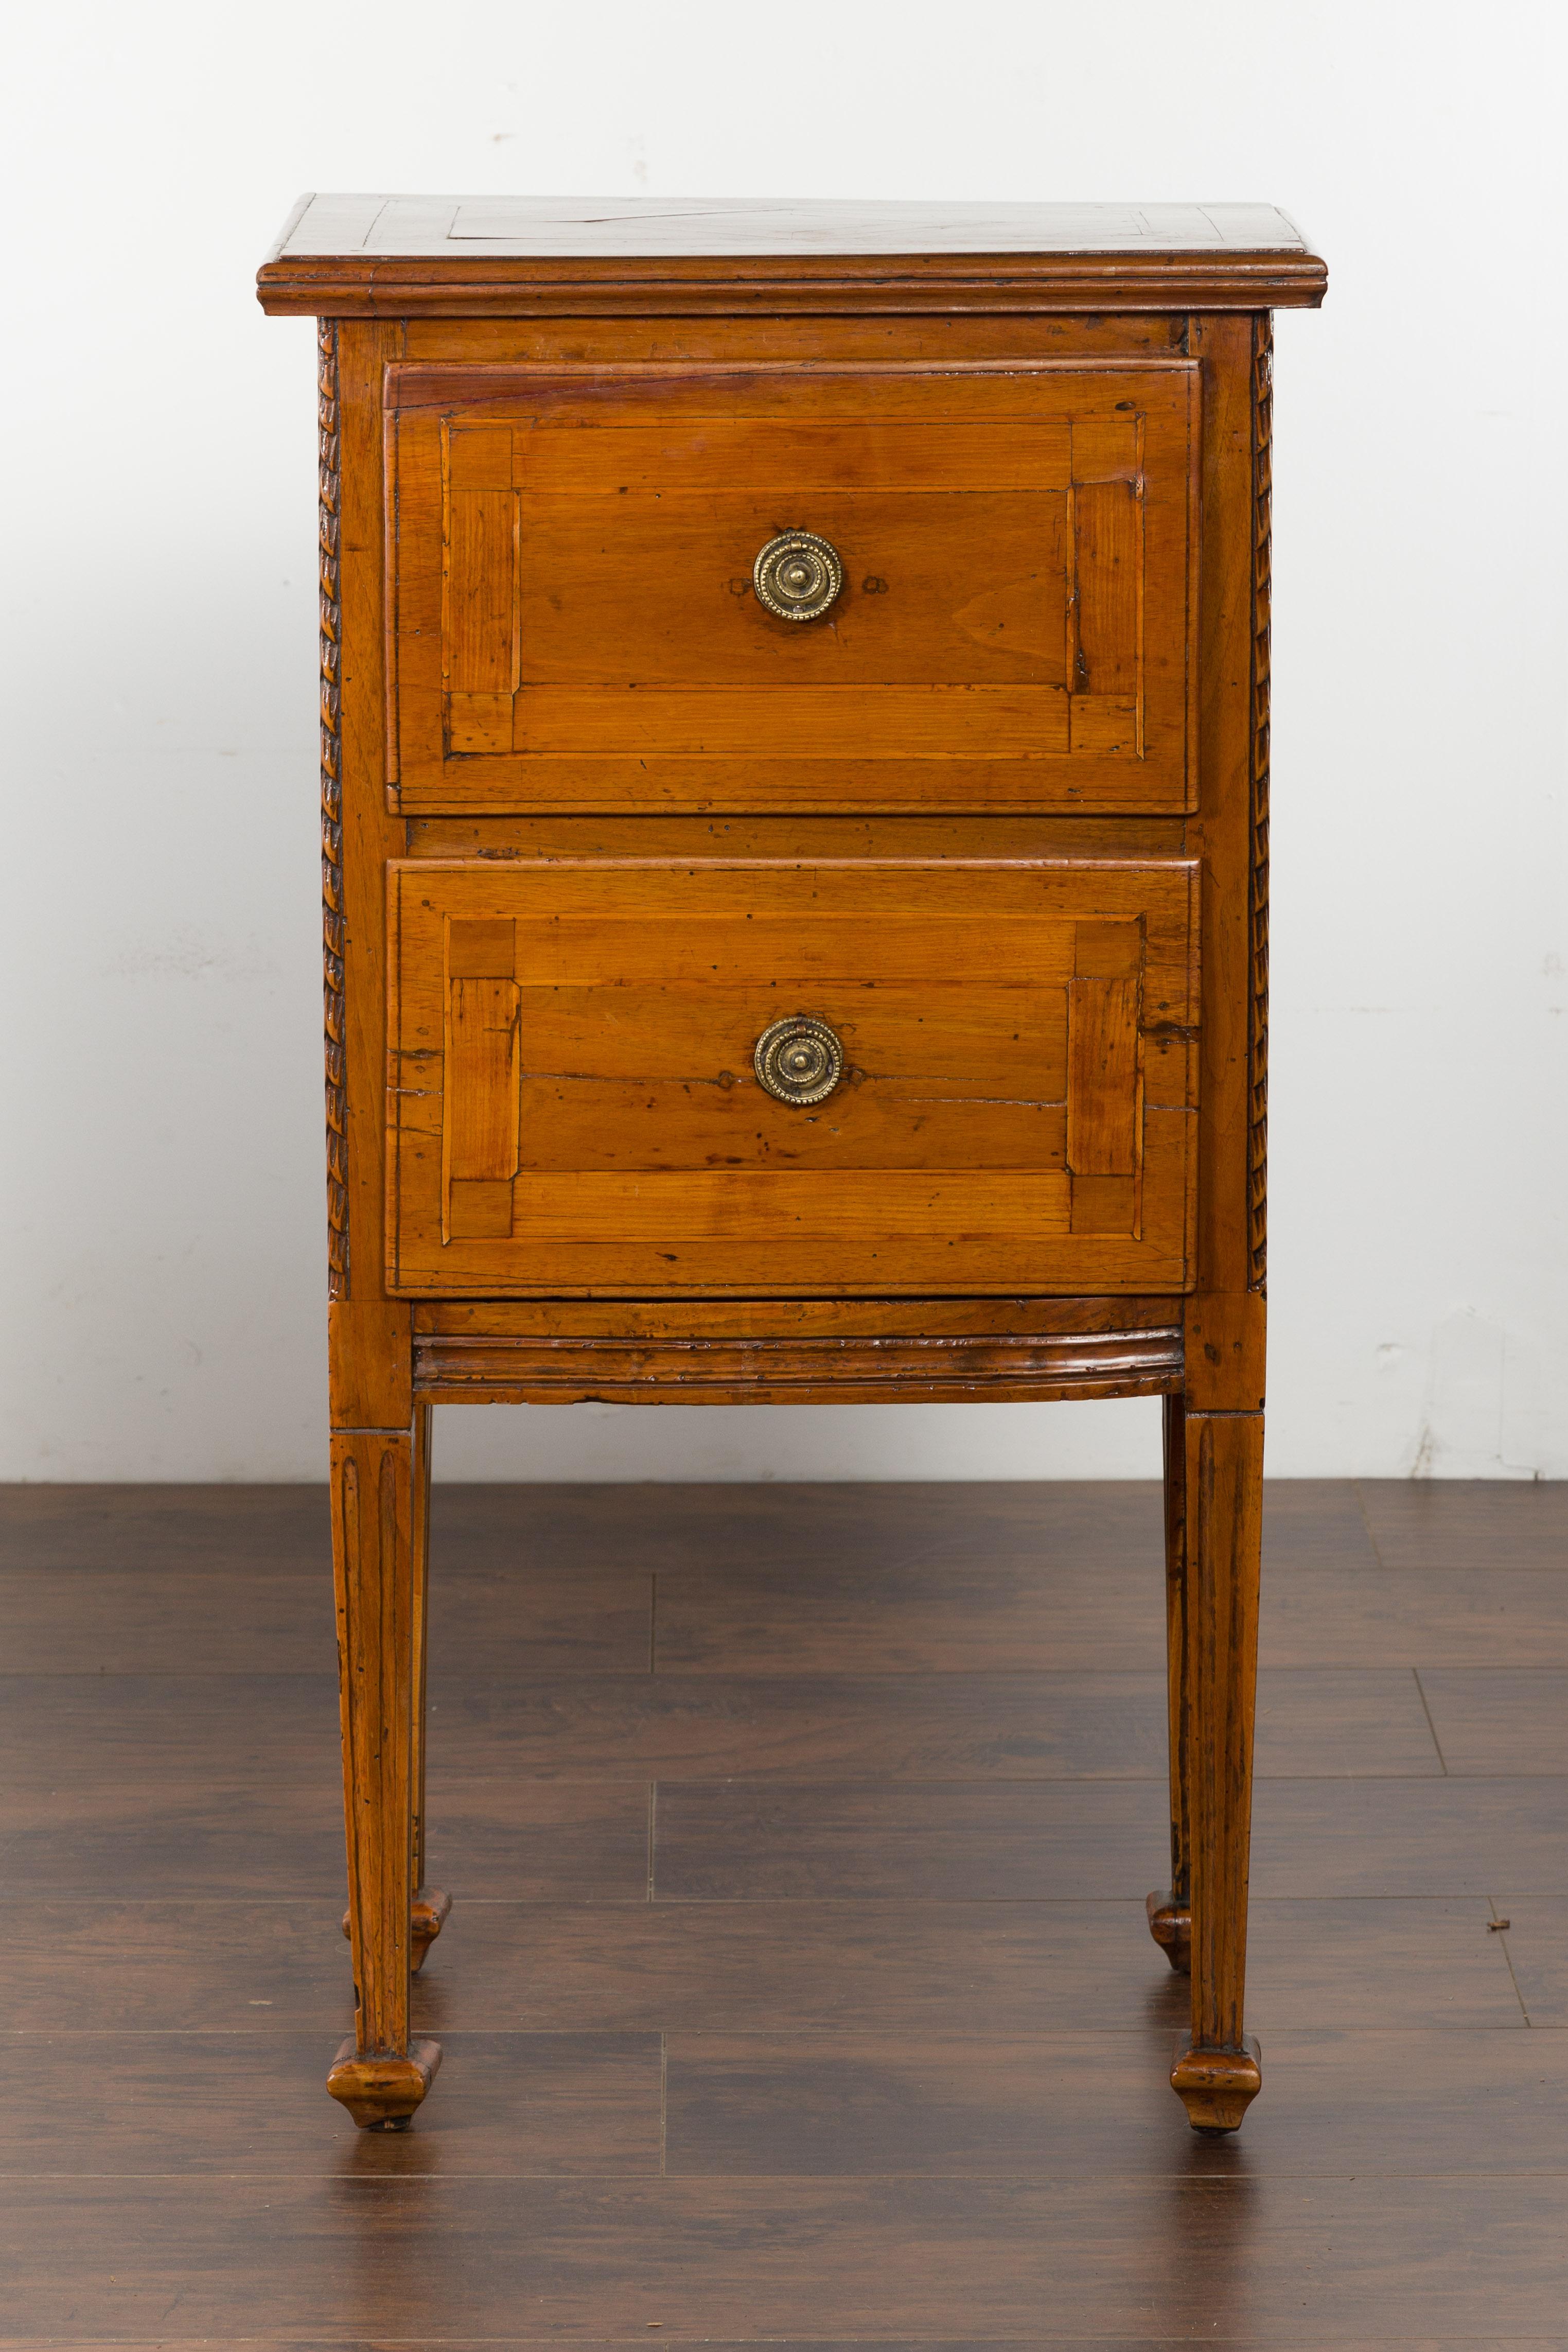 A pair of Italian neoclassical period walnut bedside tables from the early 19th century, with two drawers and tapered legs. Created in Italy during the first quarter of the 19th century, each of this pair of walnut bedside tables features a